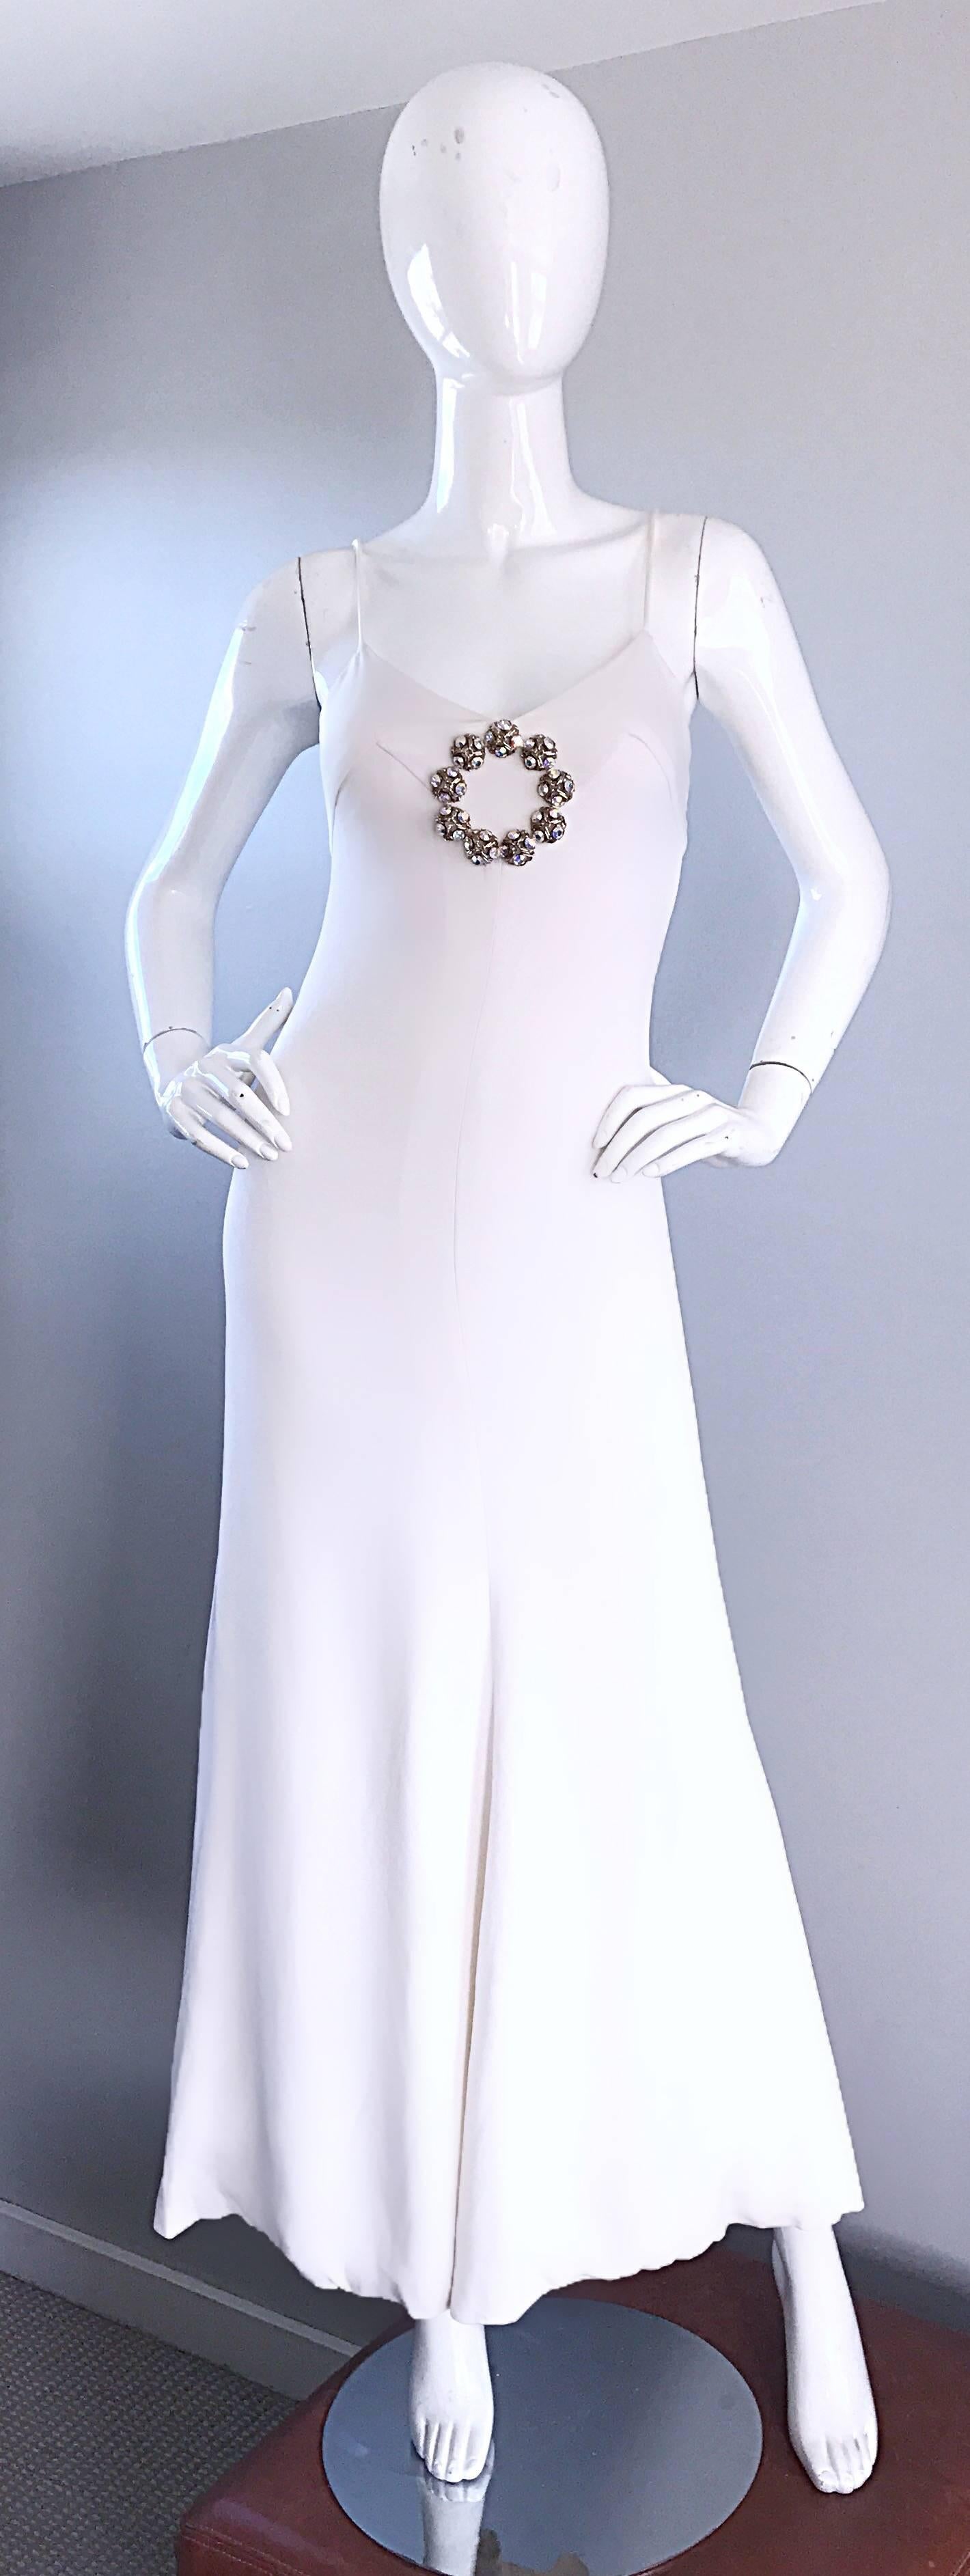 Sensational vintage 70s OSCAR DE LA RENTA Couture white rayon crepe gown! Double ply soft crepe hugs the body in all the right places. Heavy Swarovski rhinestone encrusted appliqué at center bust. Couture quality, with heavy attention to detail.